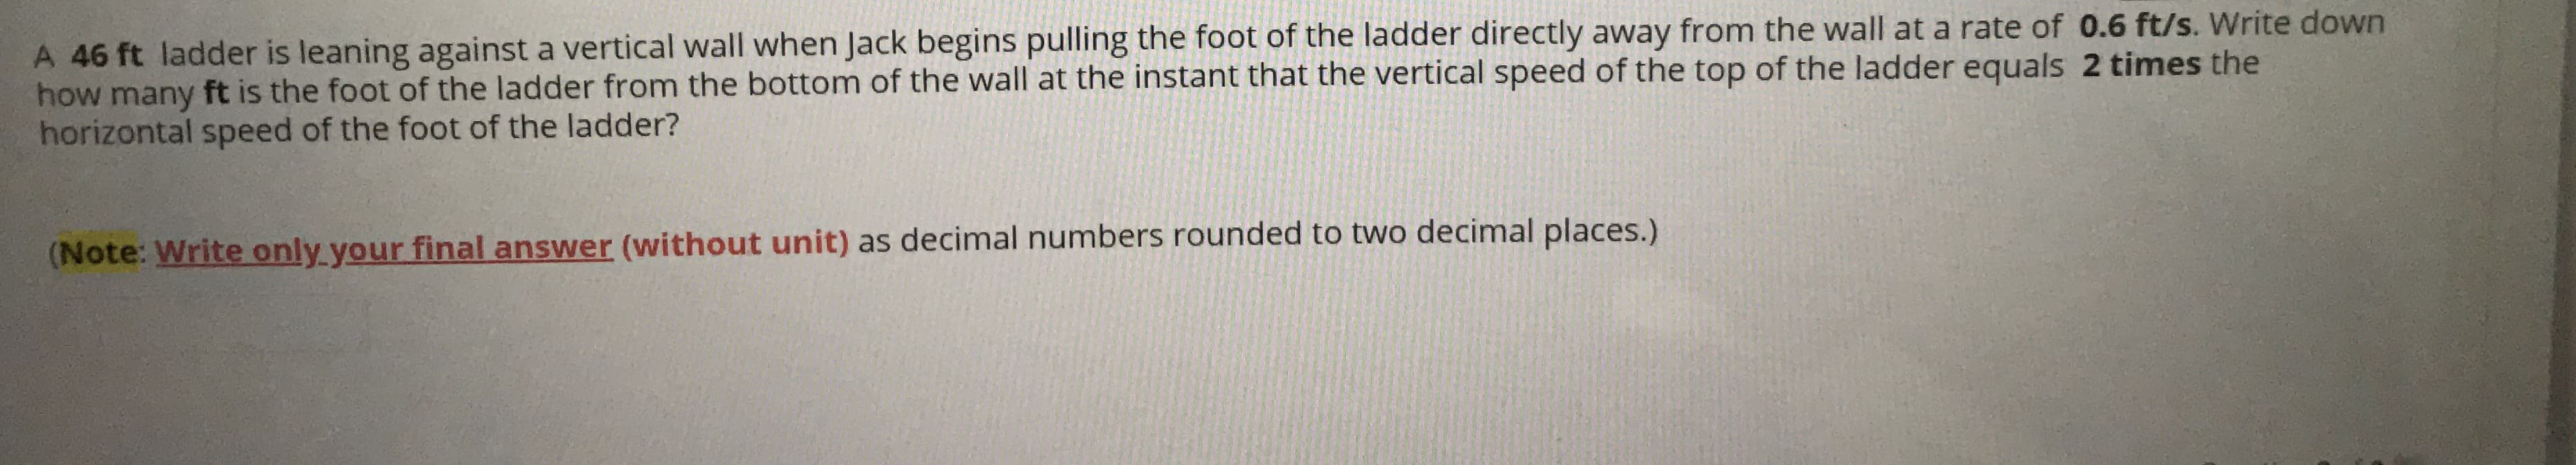 A 46 ft ladder is leaning against a vertical wall when Jack begins pulling the foot of the ladder directly away from the wall at a rate of 0.6 ft/s. Write down
how many ft is the foot of the ladder from the bottom of the wall at the instant that the vertical speed of the top of the ladder equals 2 times the
horizontal speed of the foot of the ladder?
